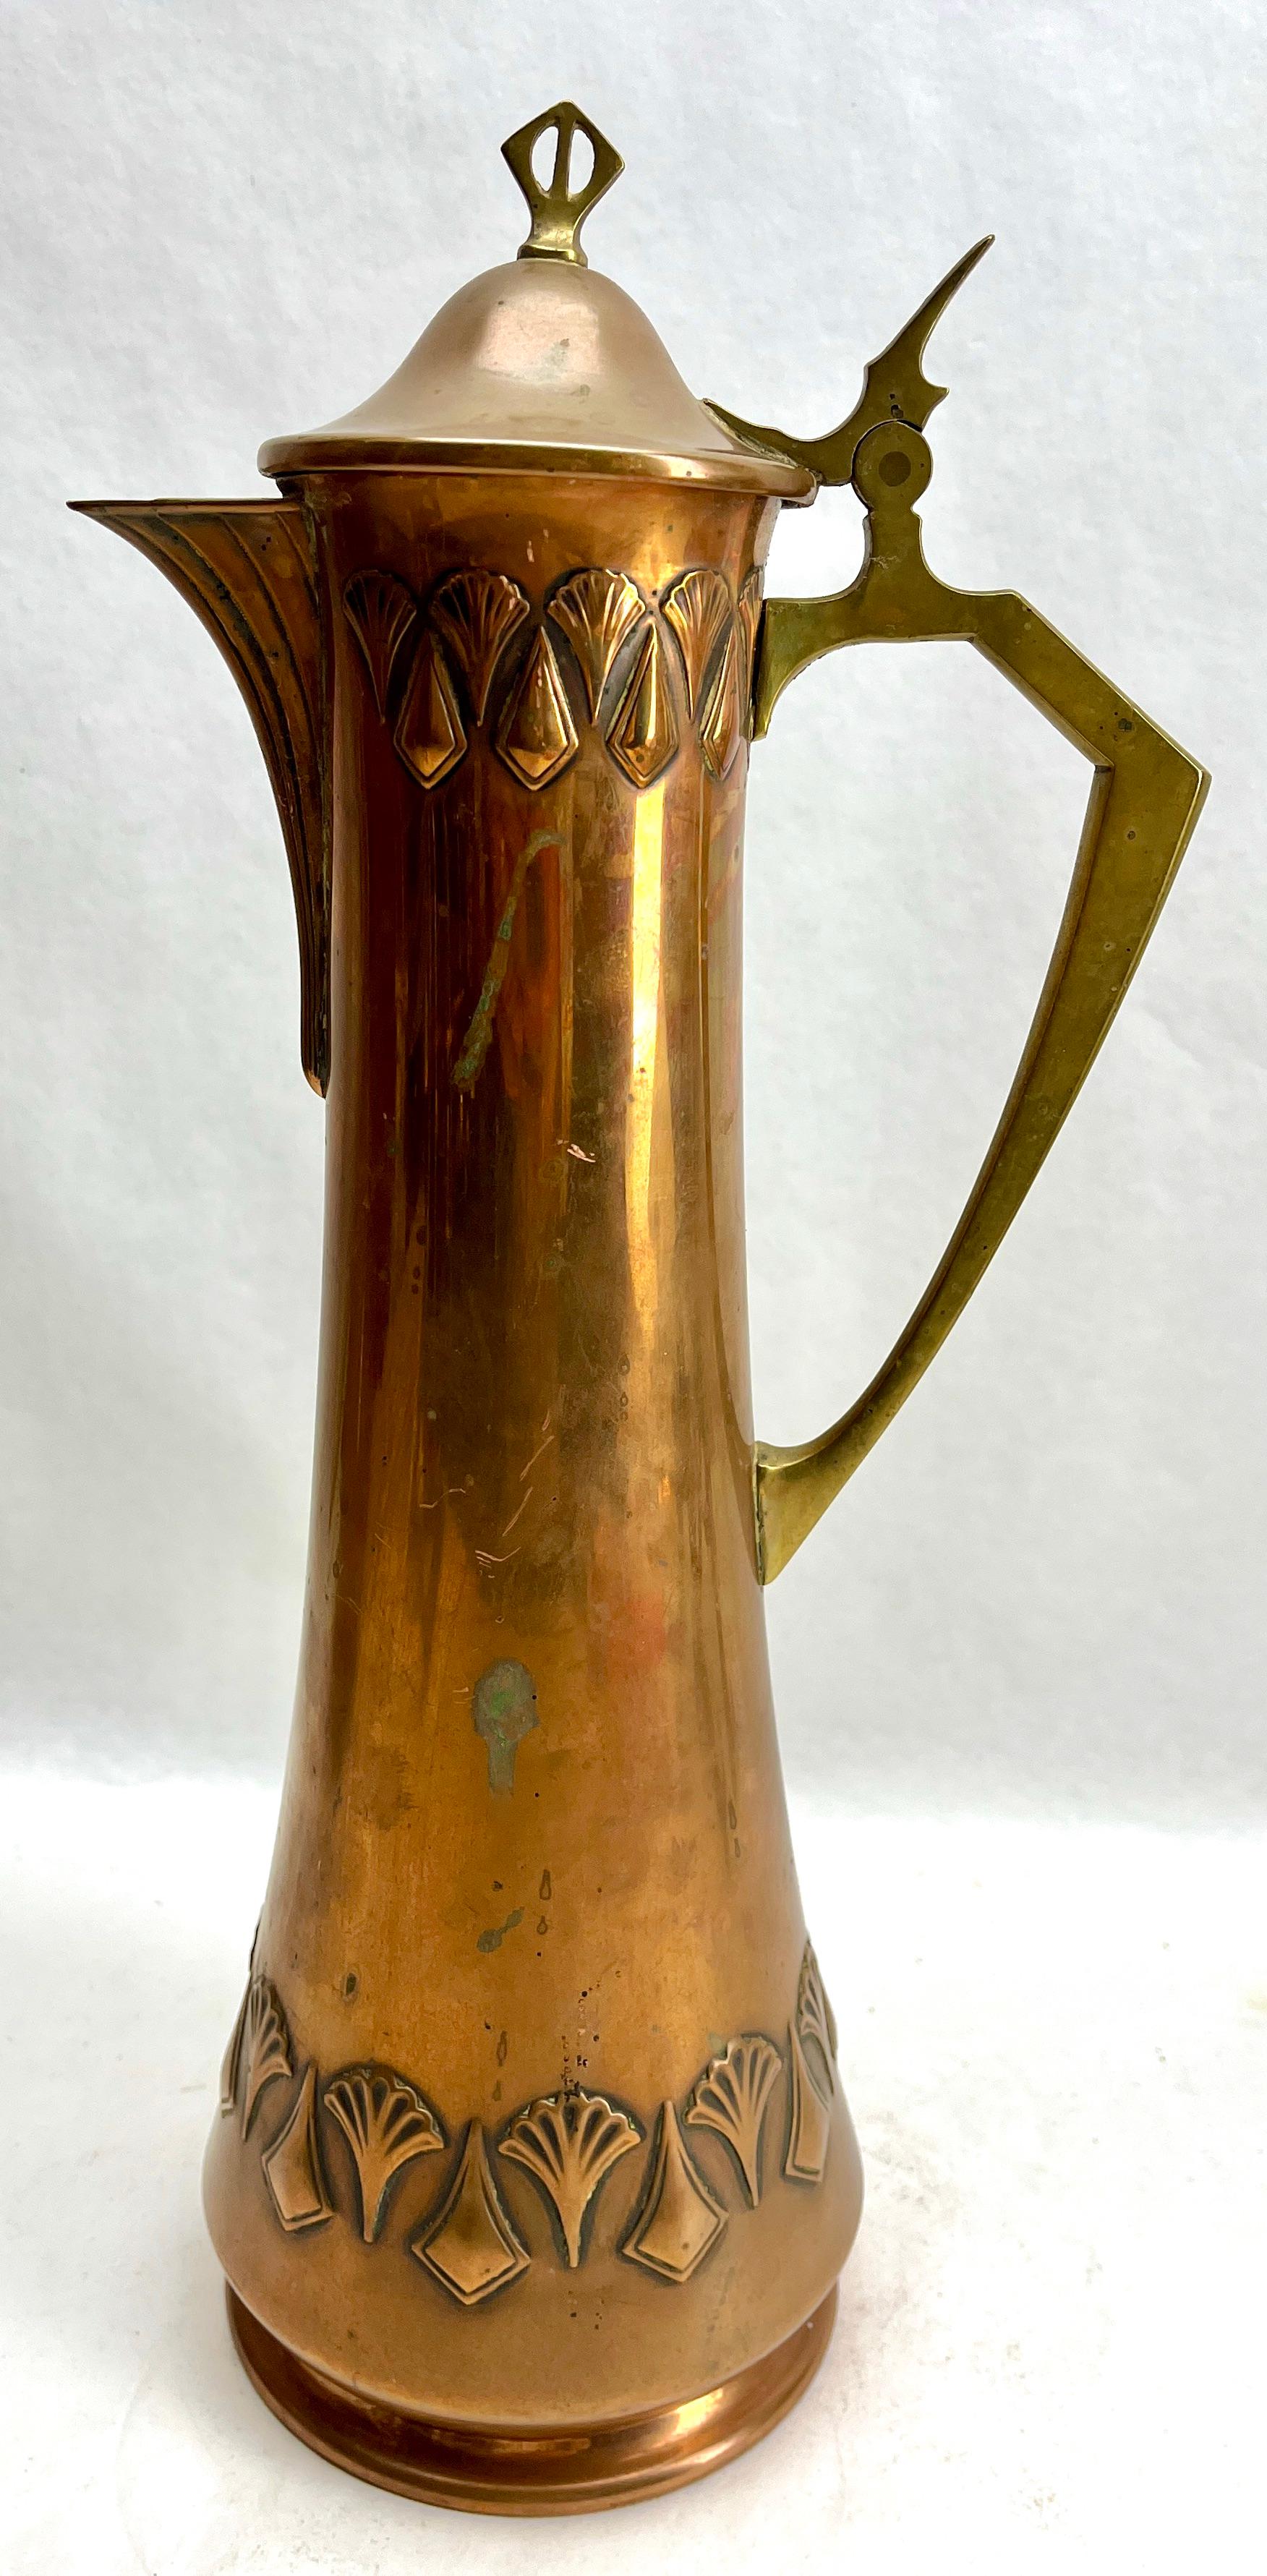 Art Nouveau Signed WMF Pitcher Brass and Copper  with Handle and Organic Details
Hand-hammered out of one piece of copper.
Brass handle with Organic style details

With original Patina on all the parts.
We Prefer to sell our items in 'uncleaned'